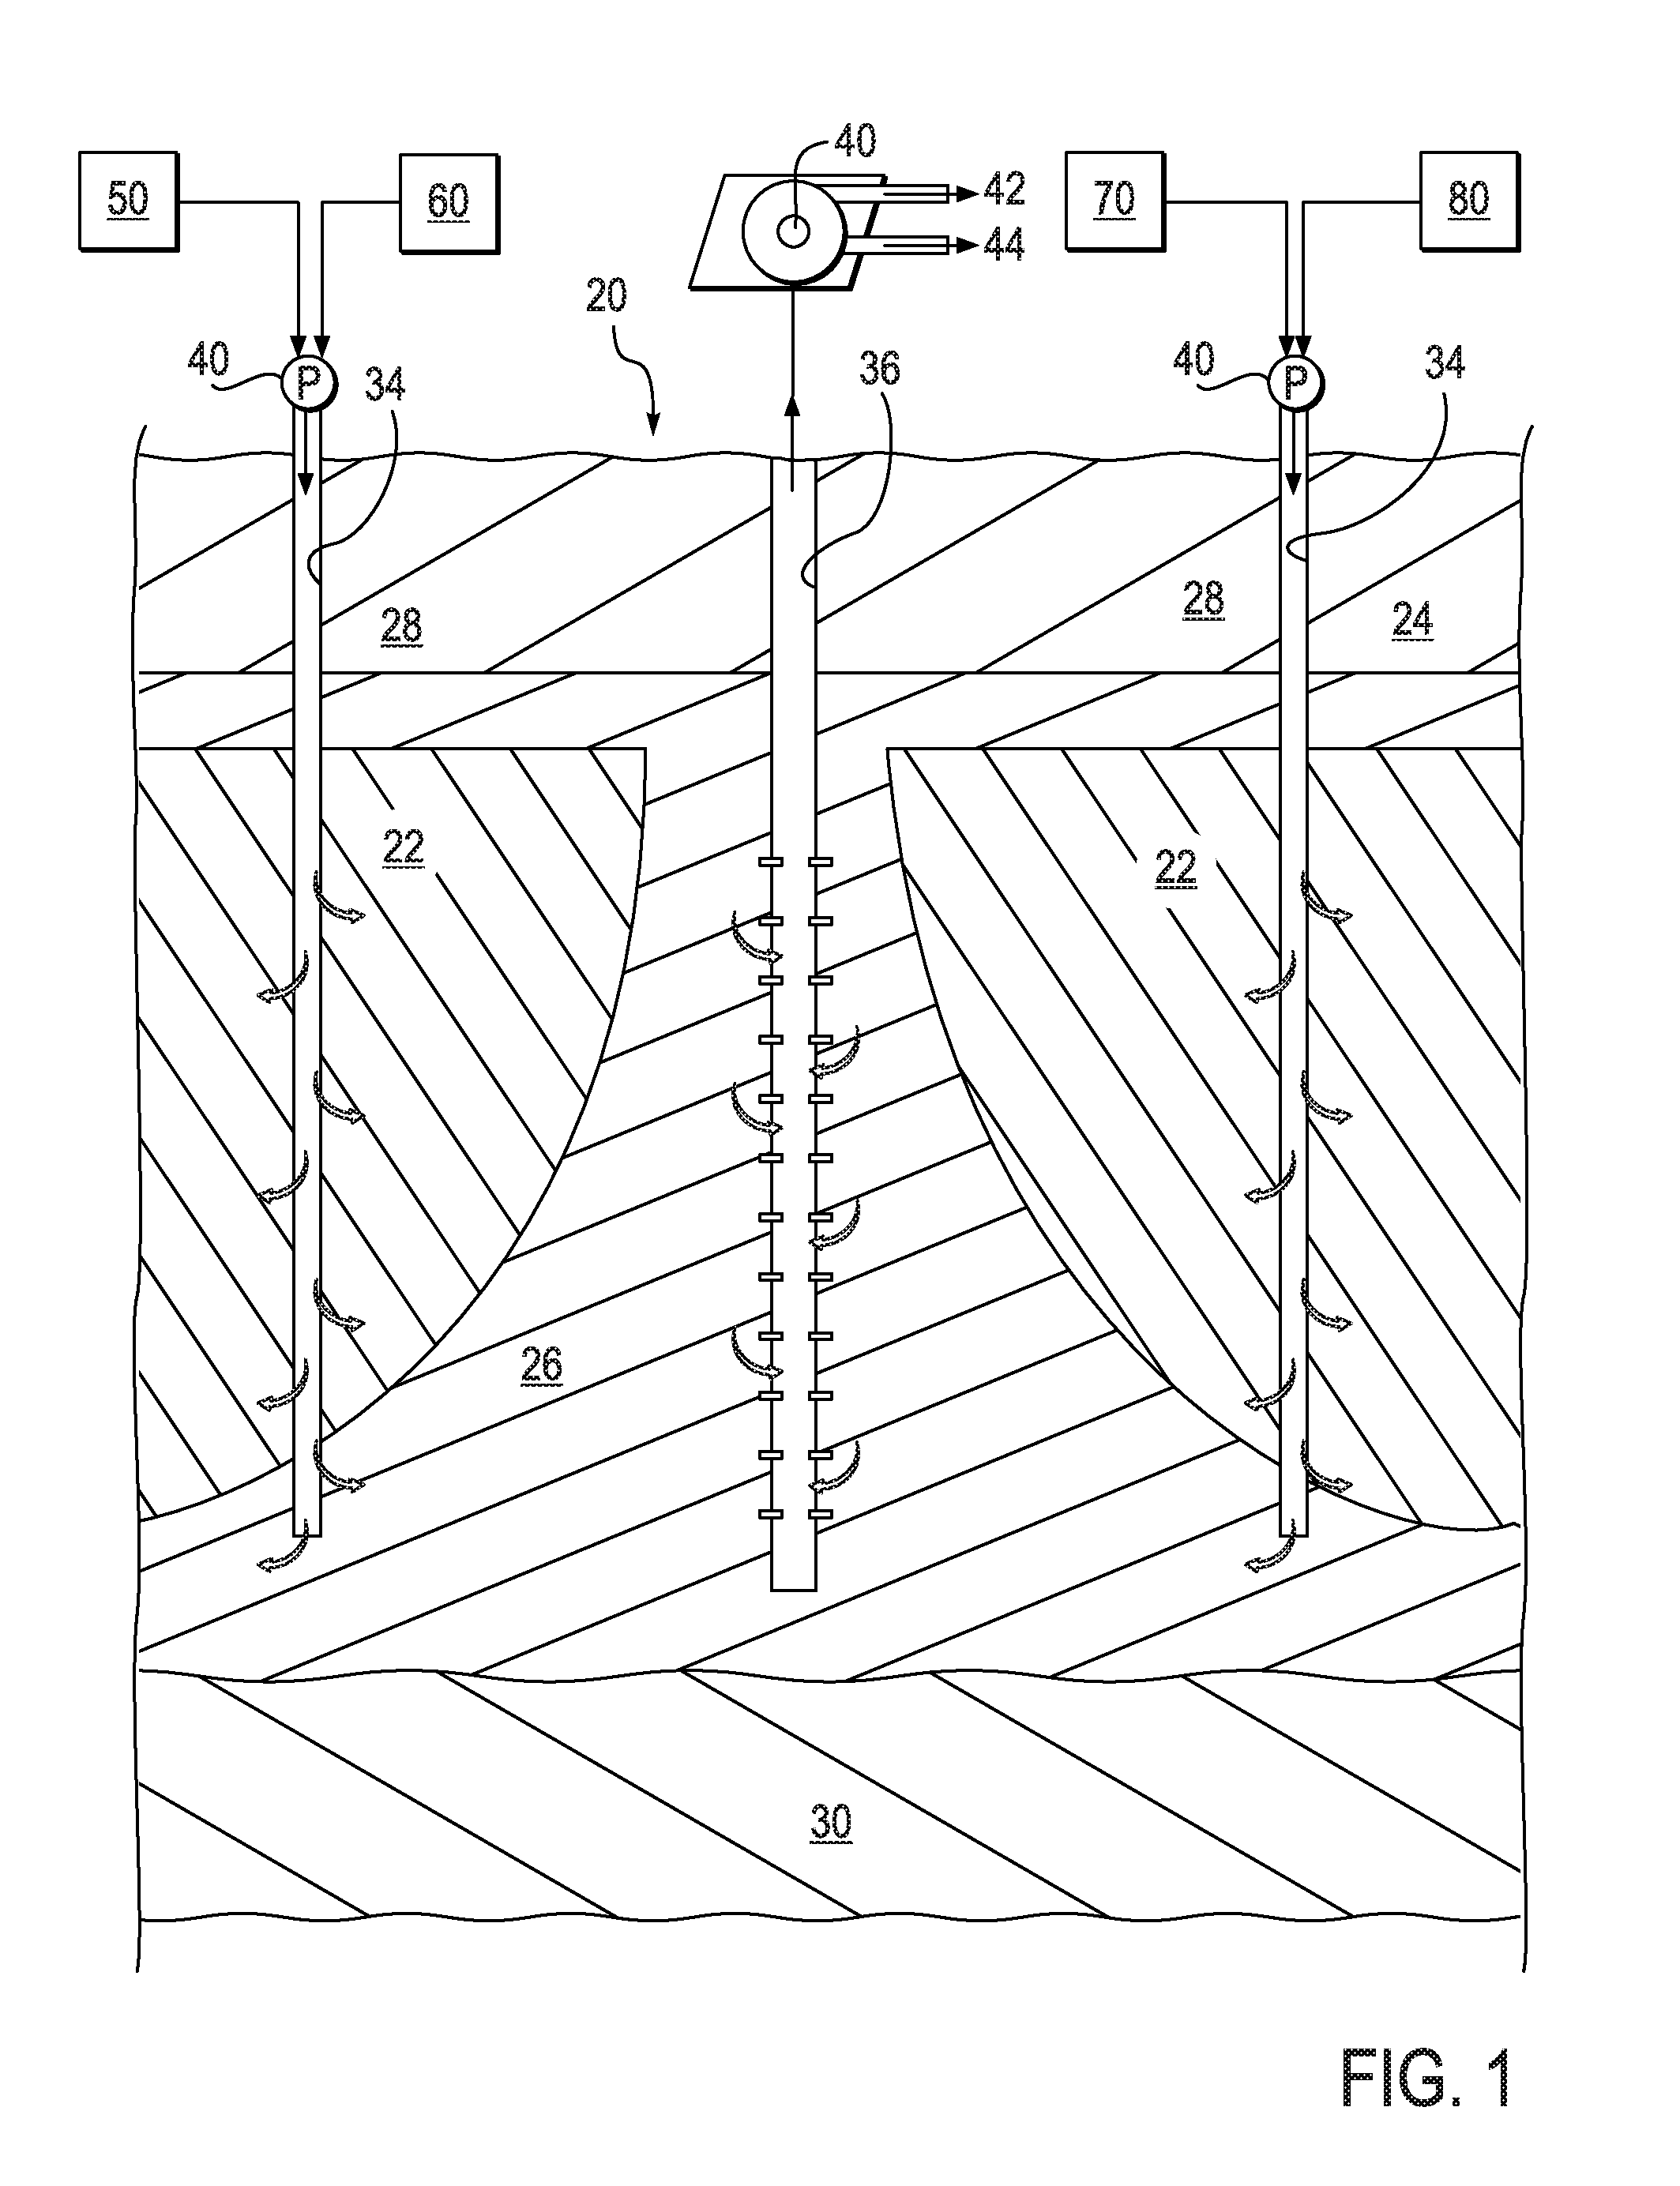 Method and system for producing hydrocarbons from a hydrate reservoir using available waste heat